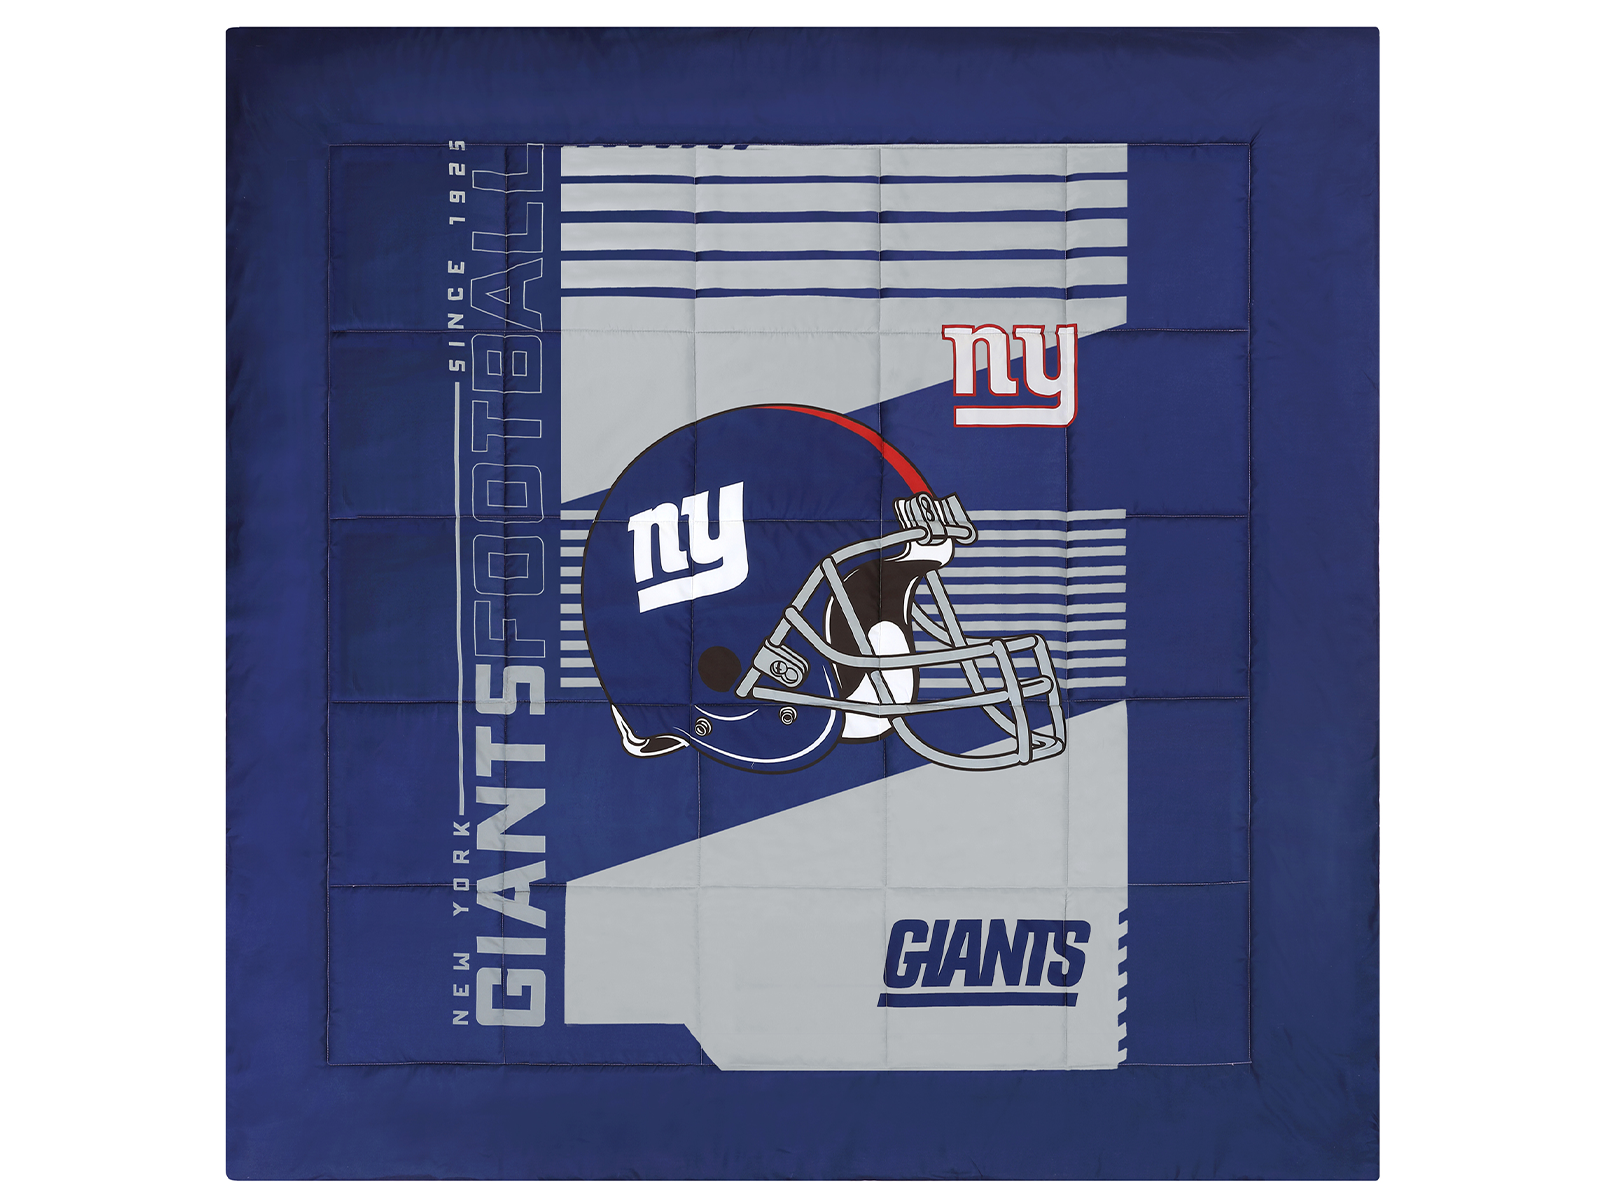 Cathay Sports Queen NFL Status Bed-In-A-Bag Set